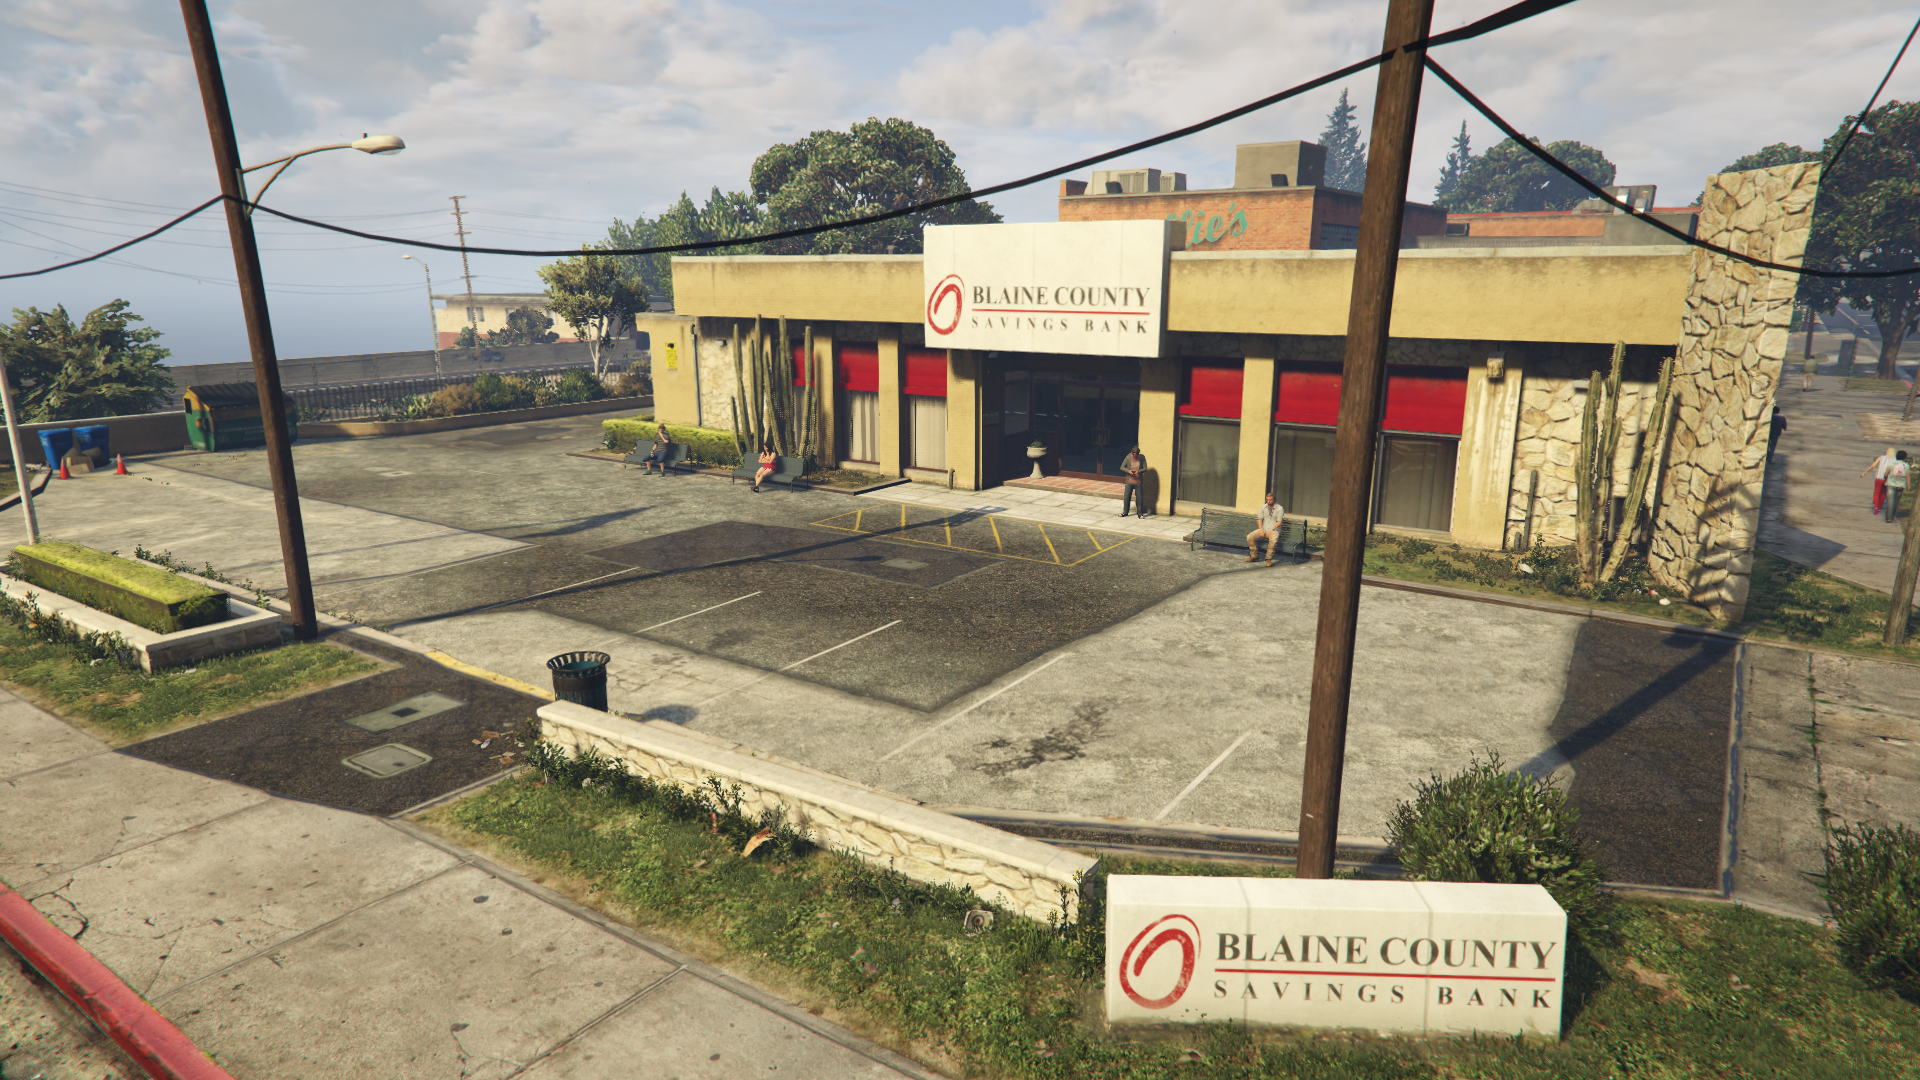 Are there banks in gta 5 фото 6